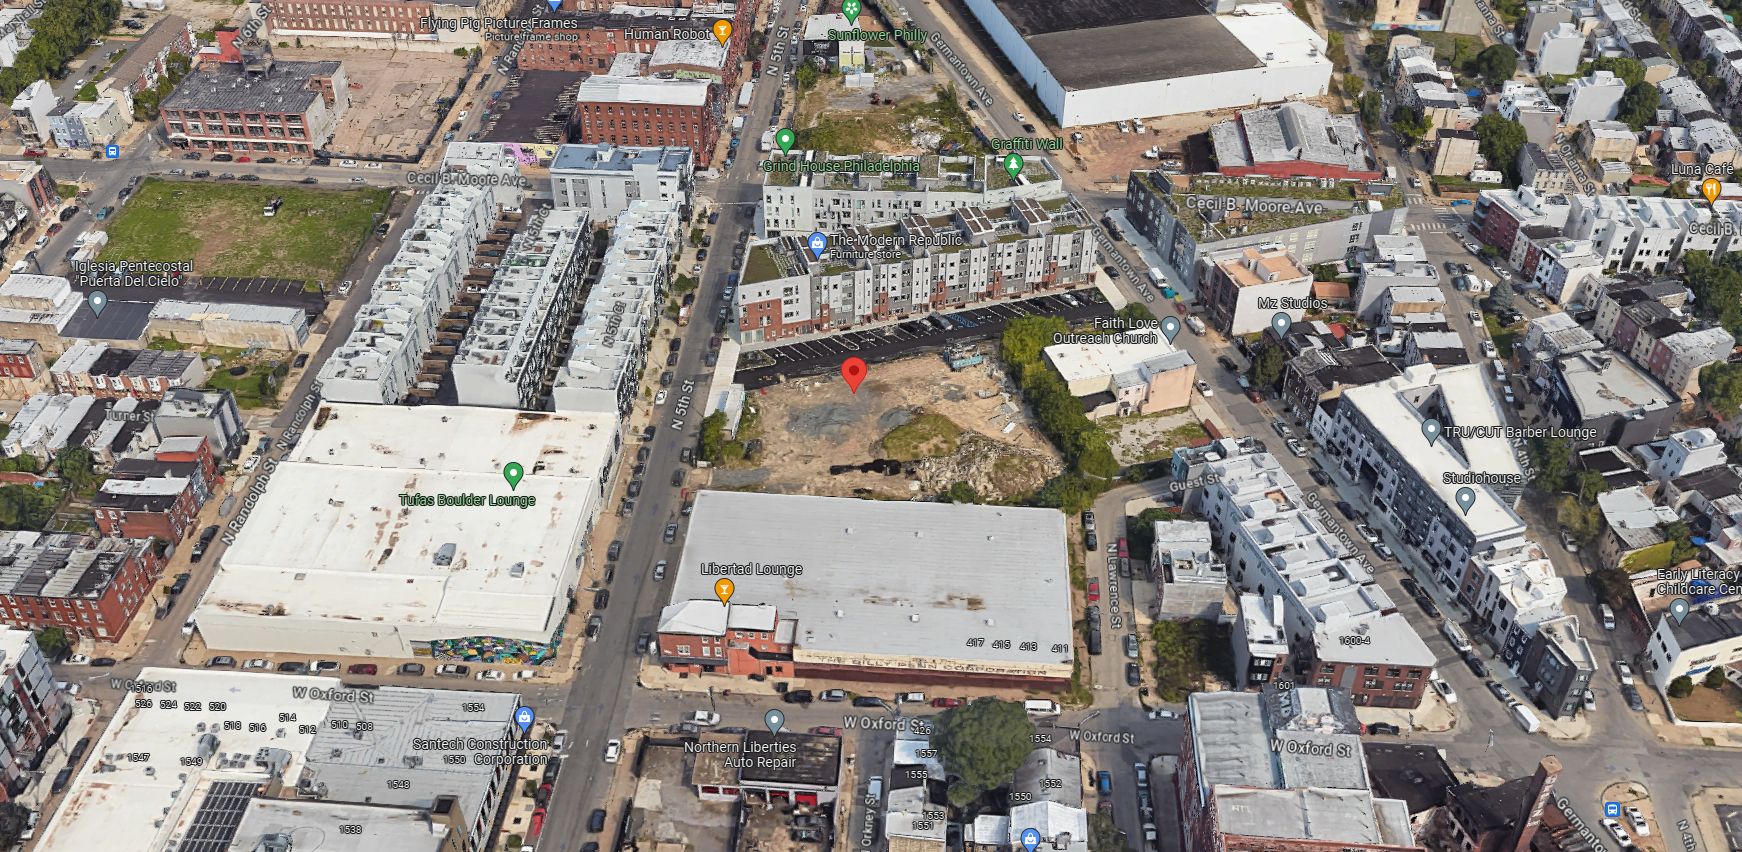 1625-35 North 5th Street. Site conditions prior to redevelopment. Looking north. Credit: Google Maps